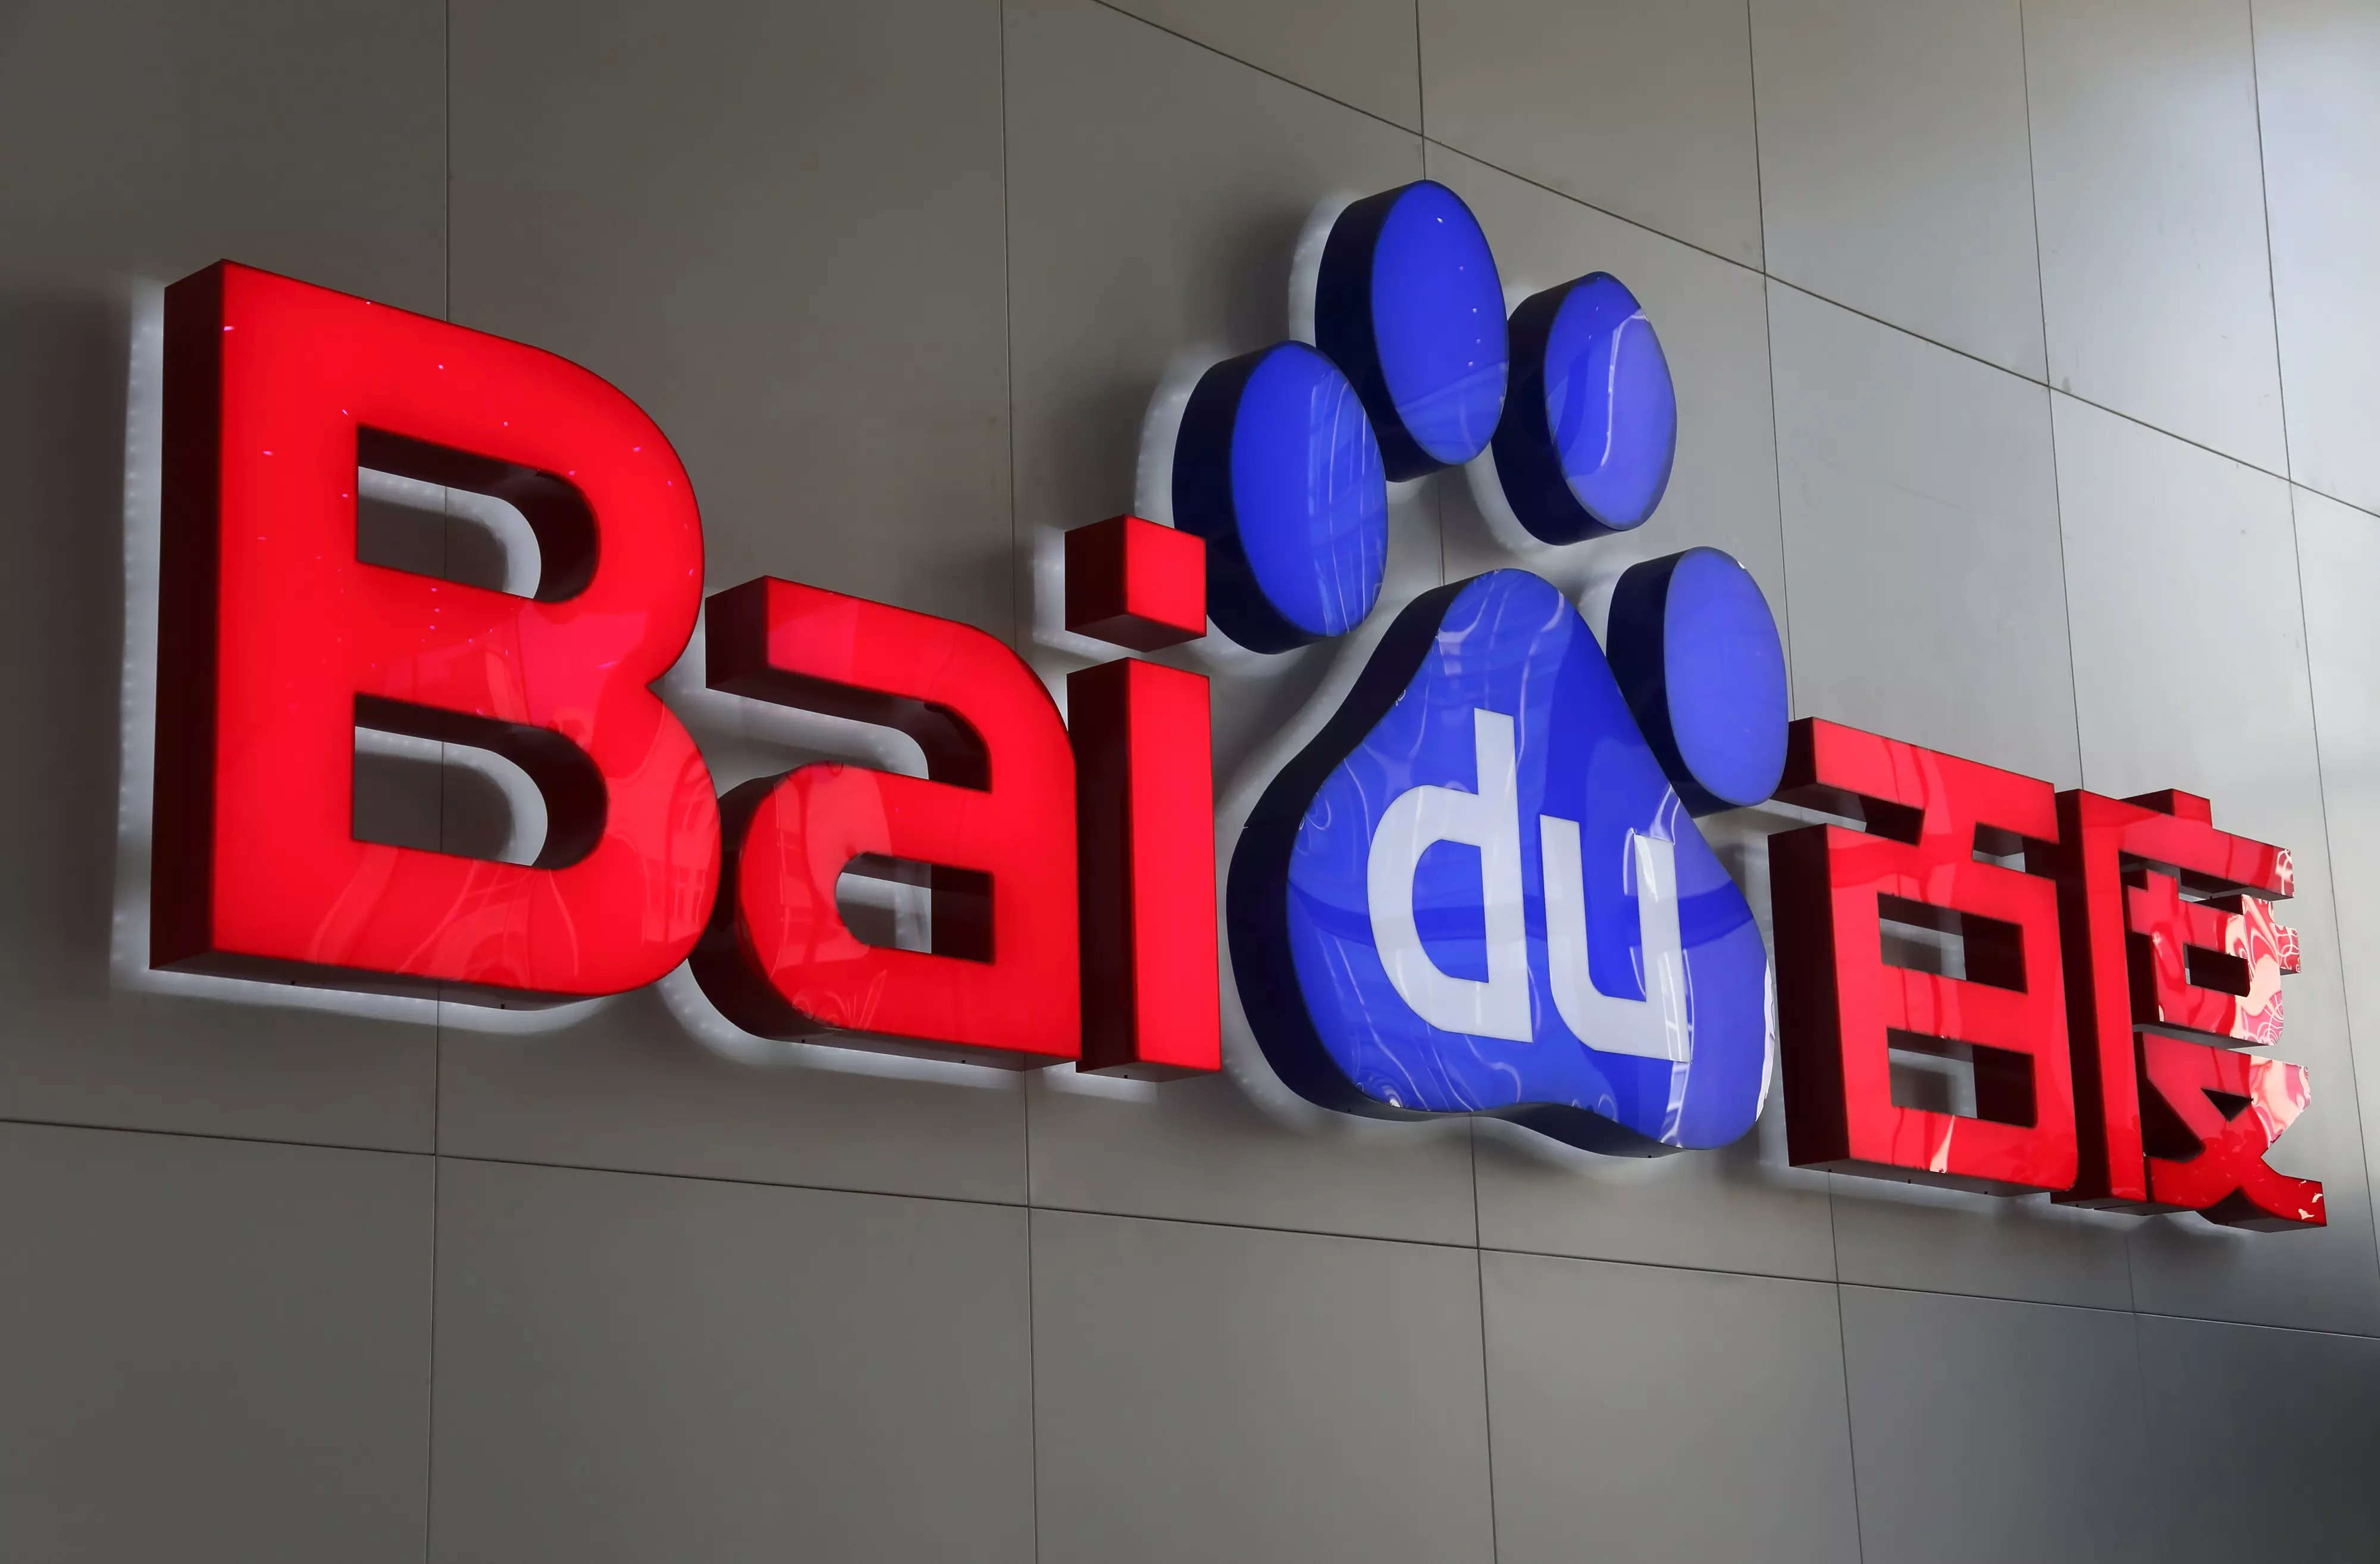  Baidu is also in talks with local governments in Beijing, Shanghai and Shenzhen, to secure licenses within a year to test fully-driverless and unpaid robotaxis in those cities, according to Wei.